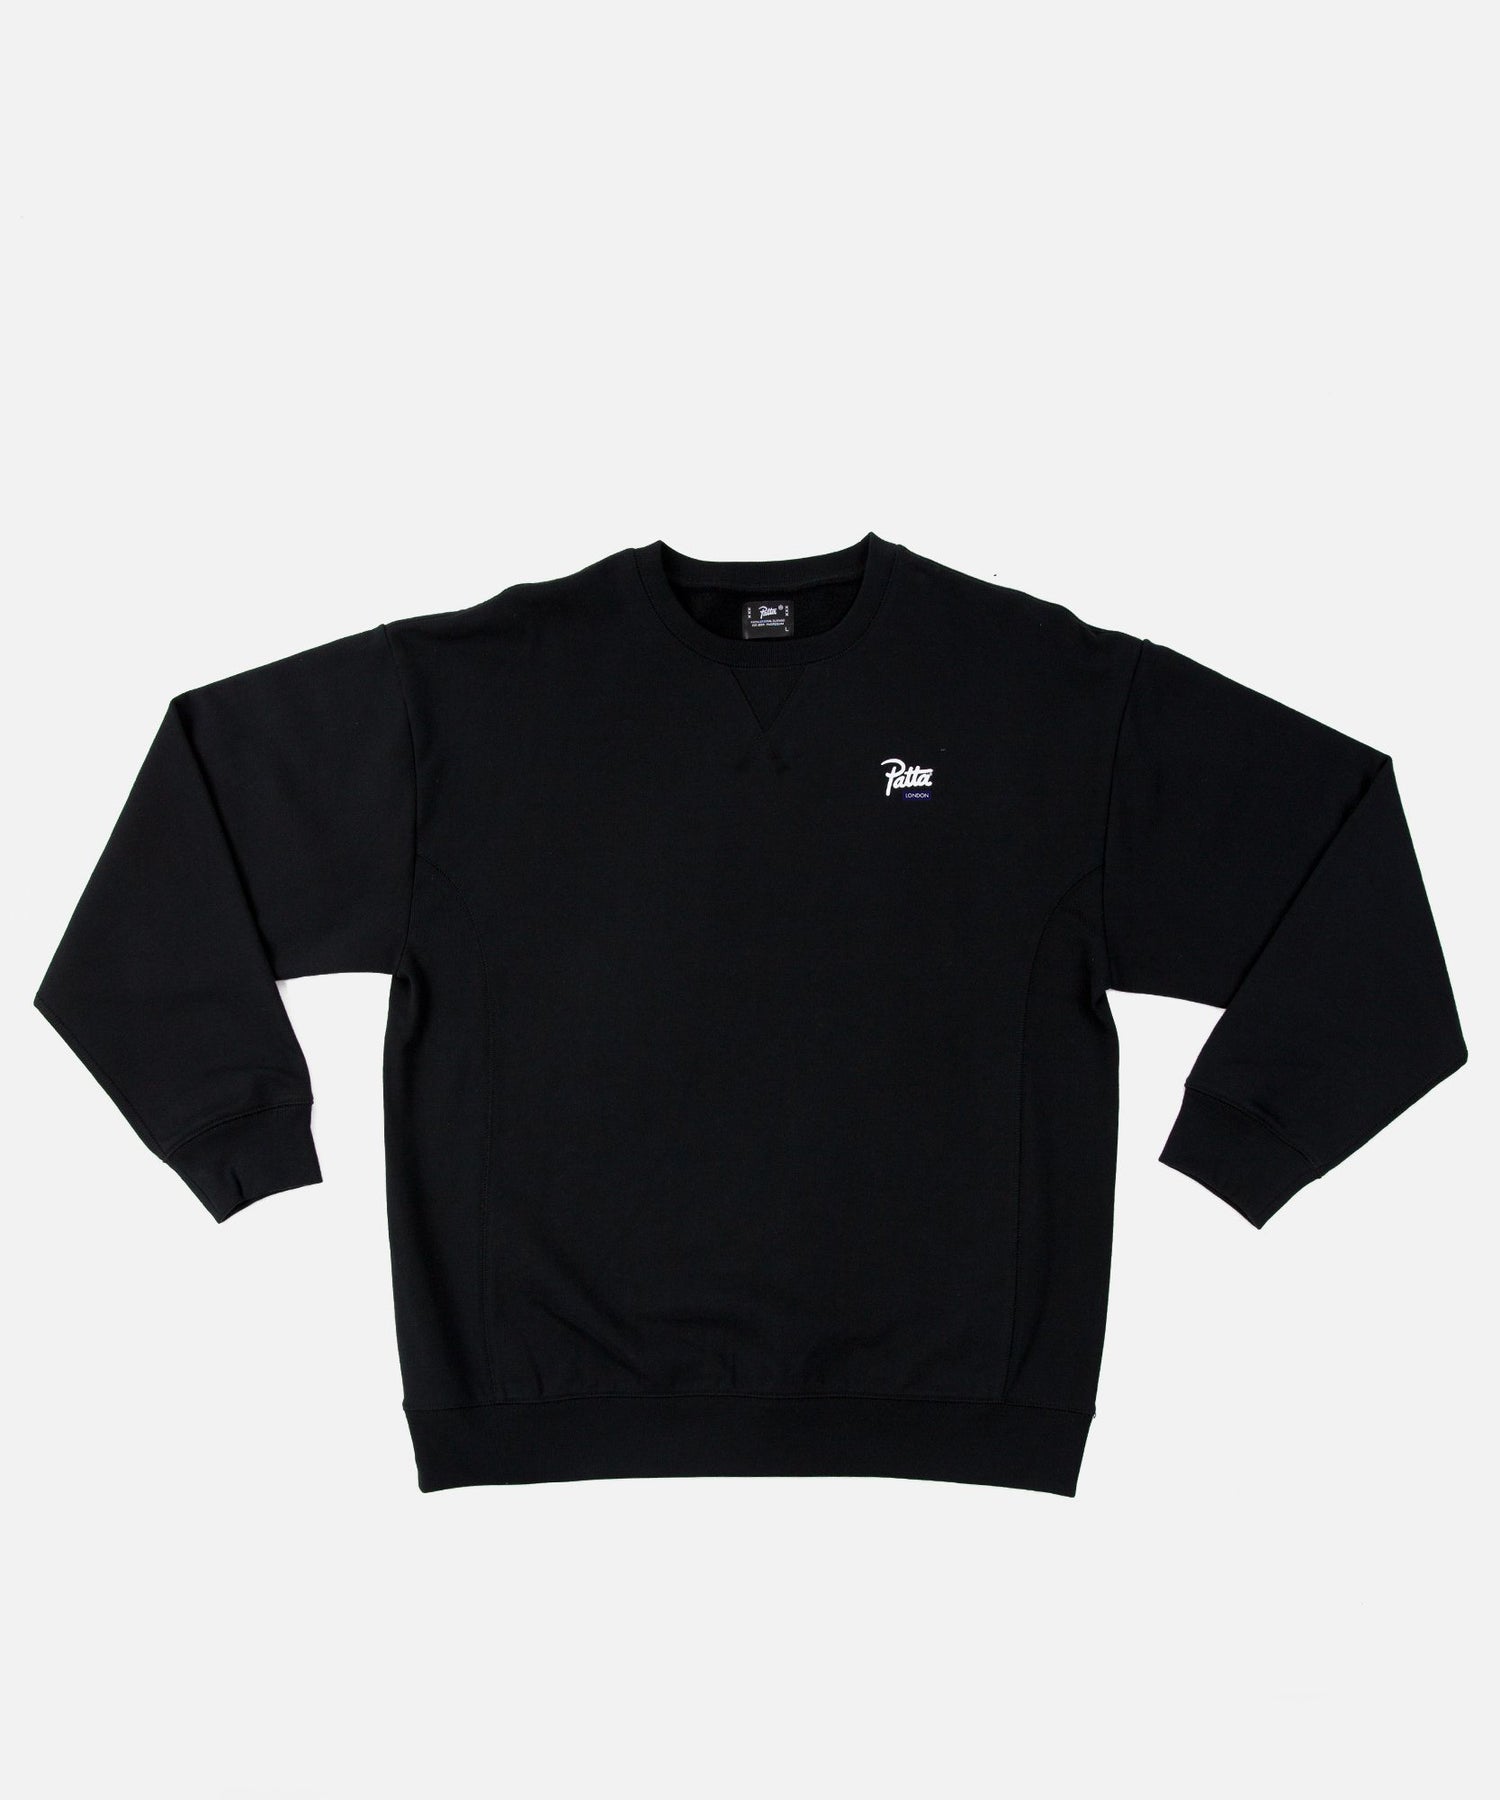 IN-STORE EXCLUSIVE: Patta London Chapter Crewneck Sweater (Black)